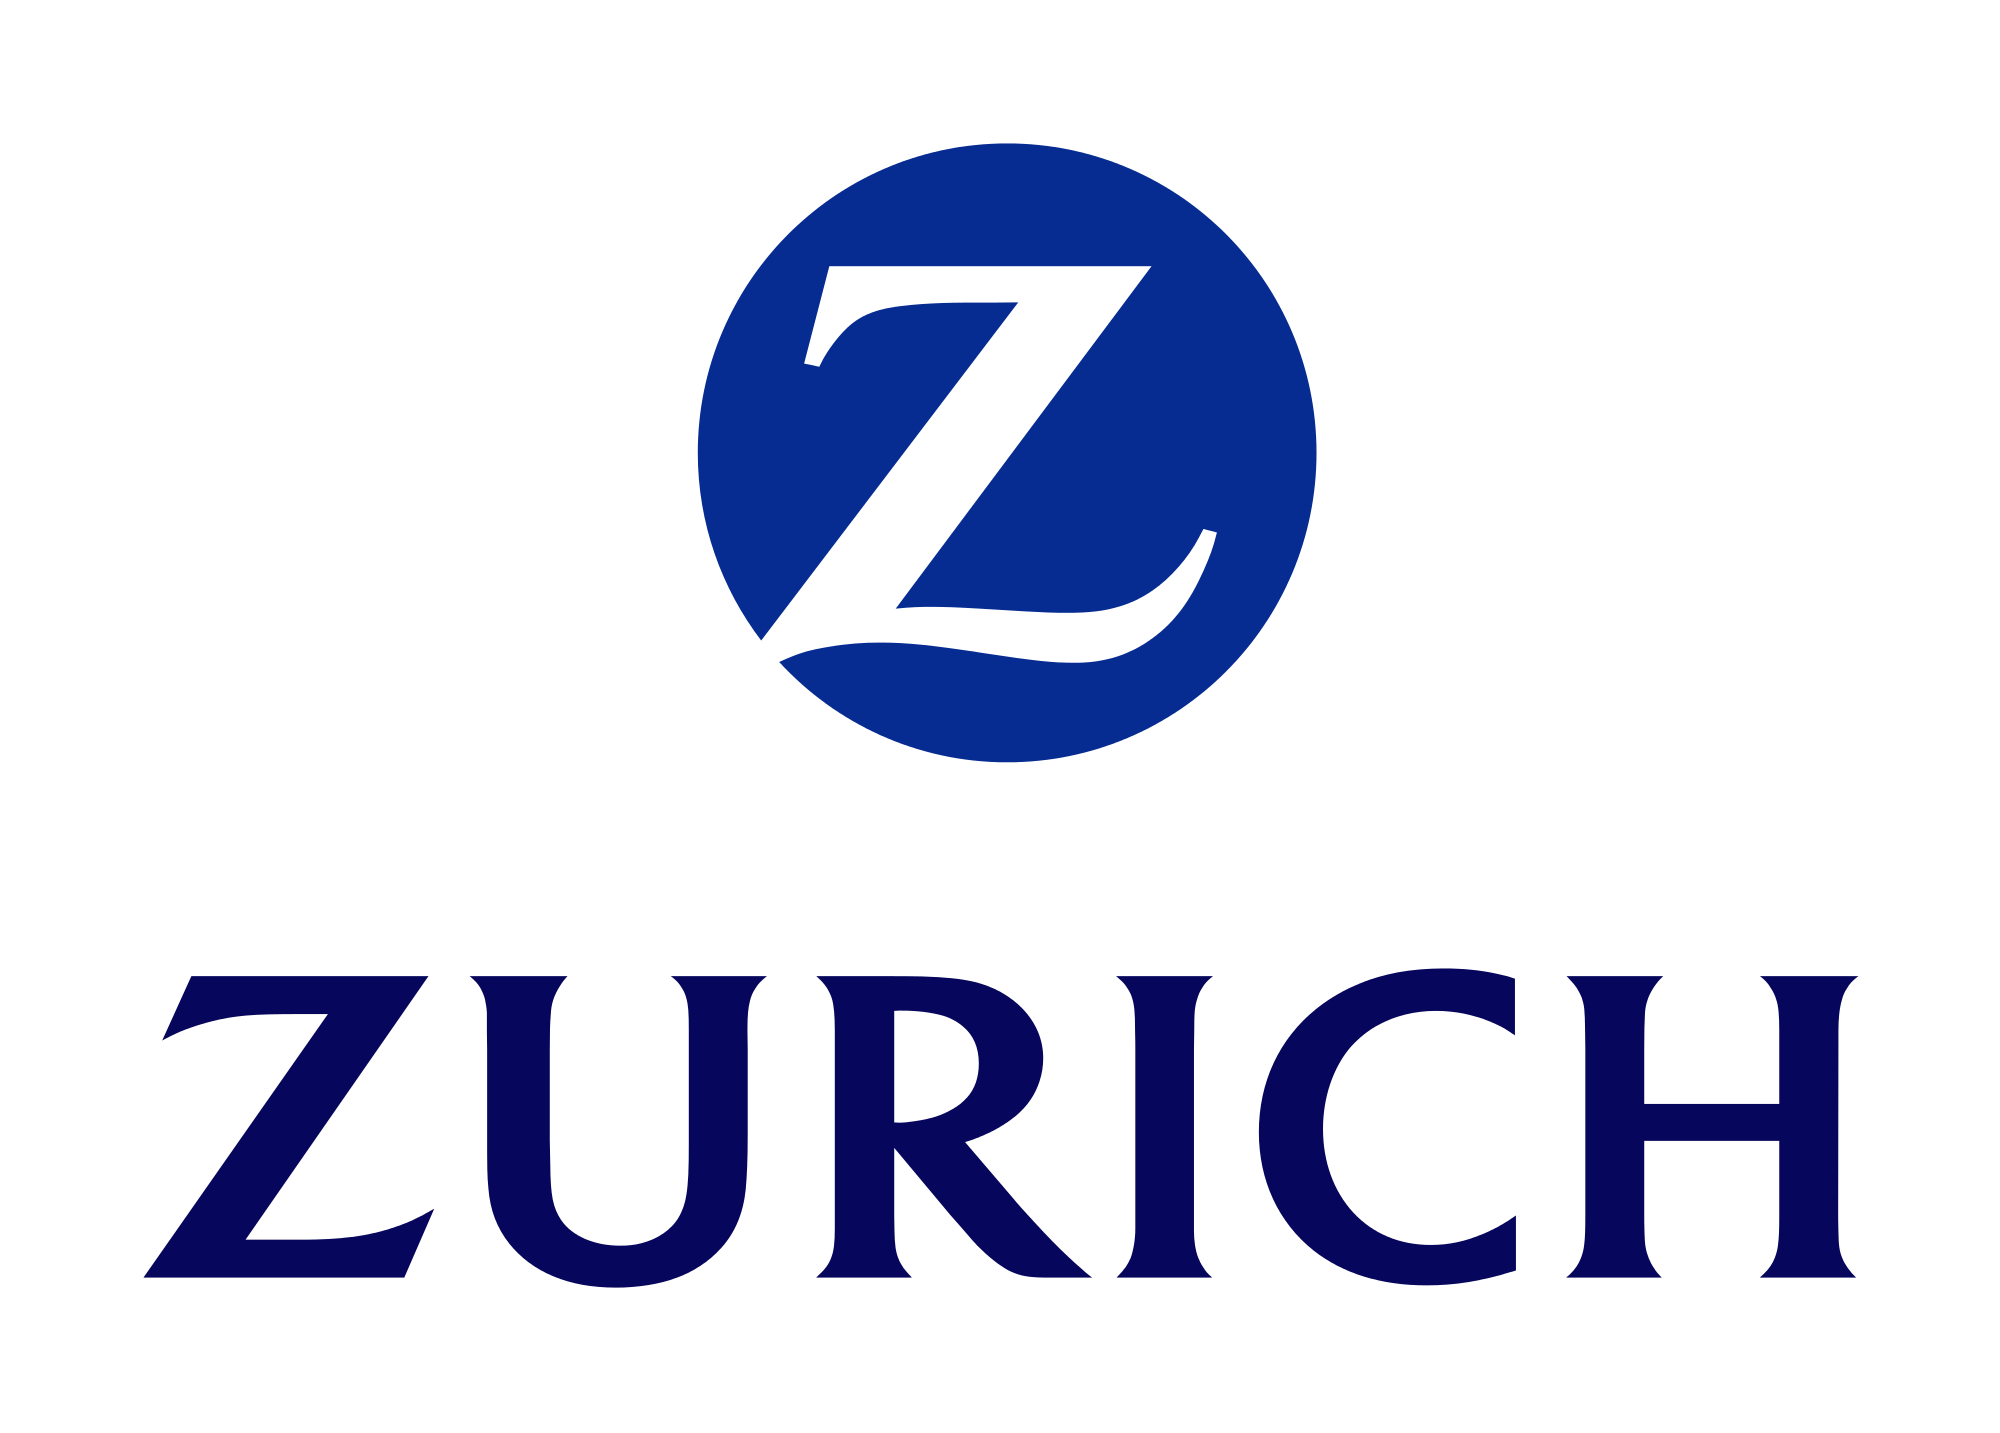 Zurich’s flood resilience alliance extended to 2023 with new $1bn funding goal